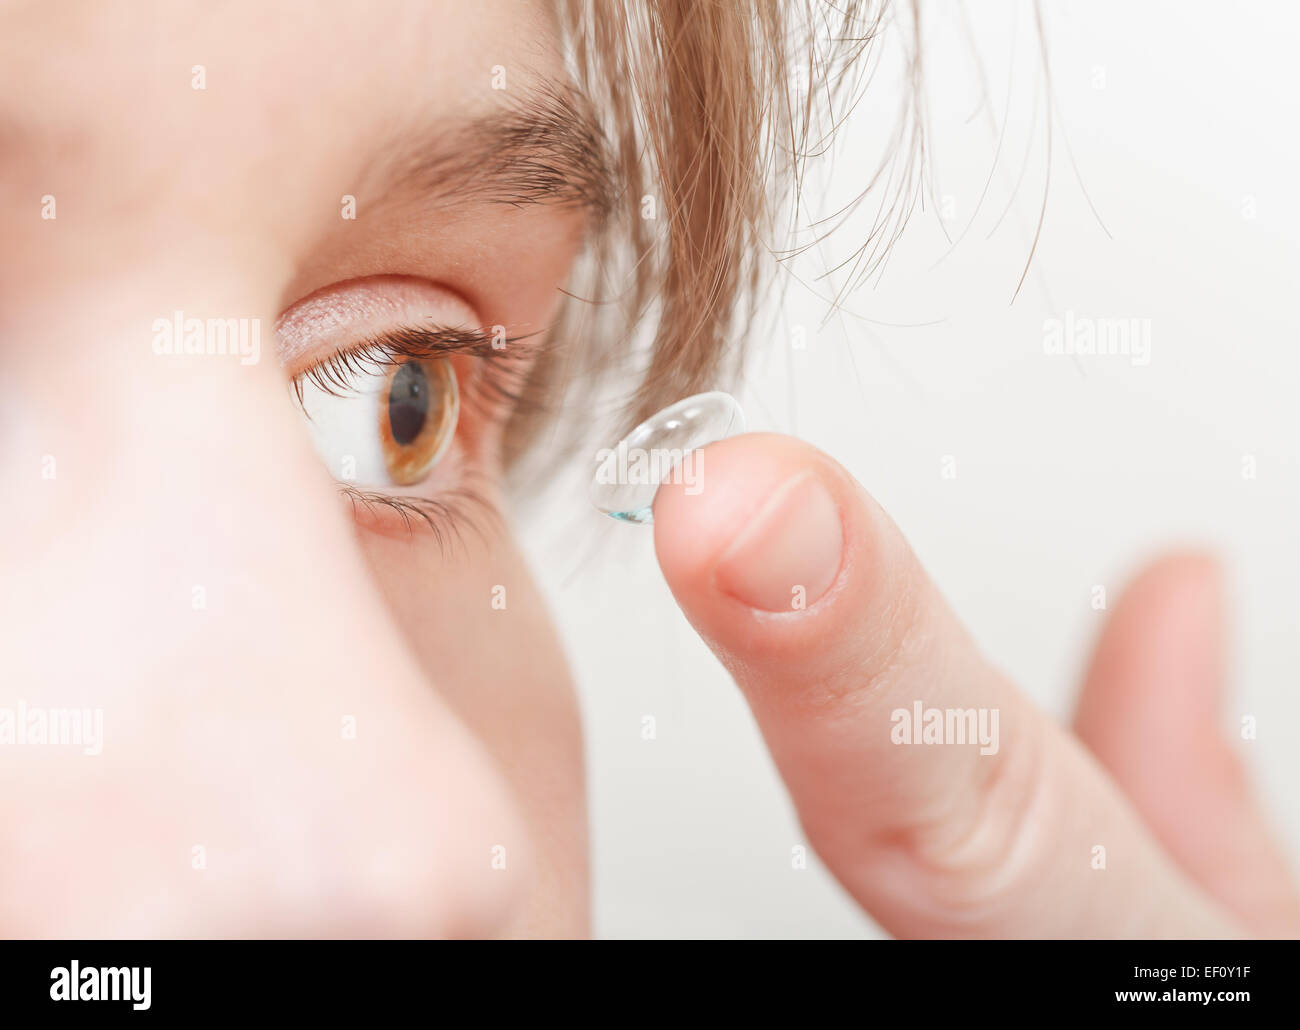 young woman inserts corrective lens in eye close up Stock Photo